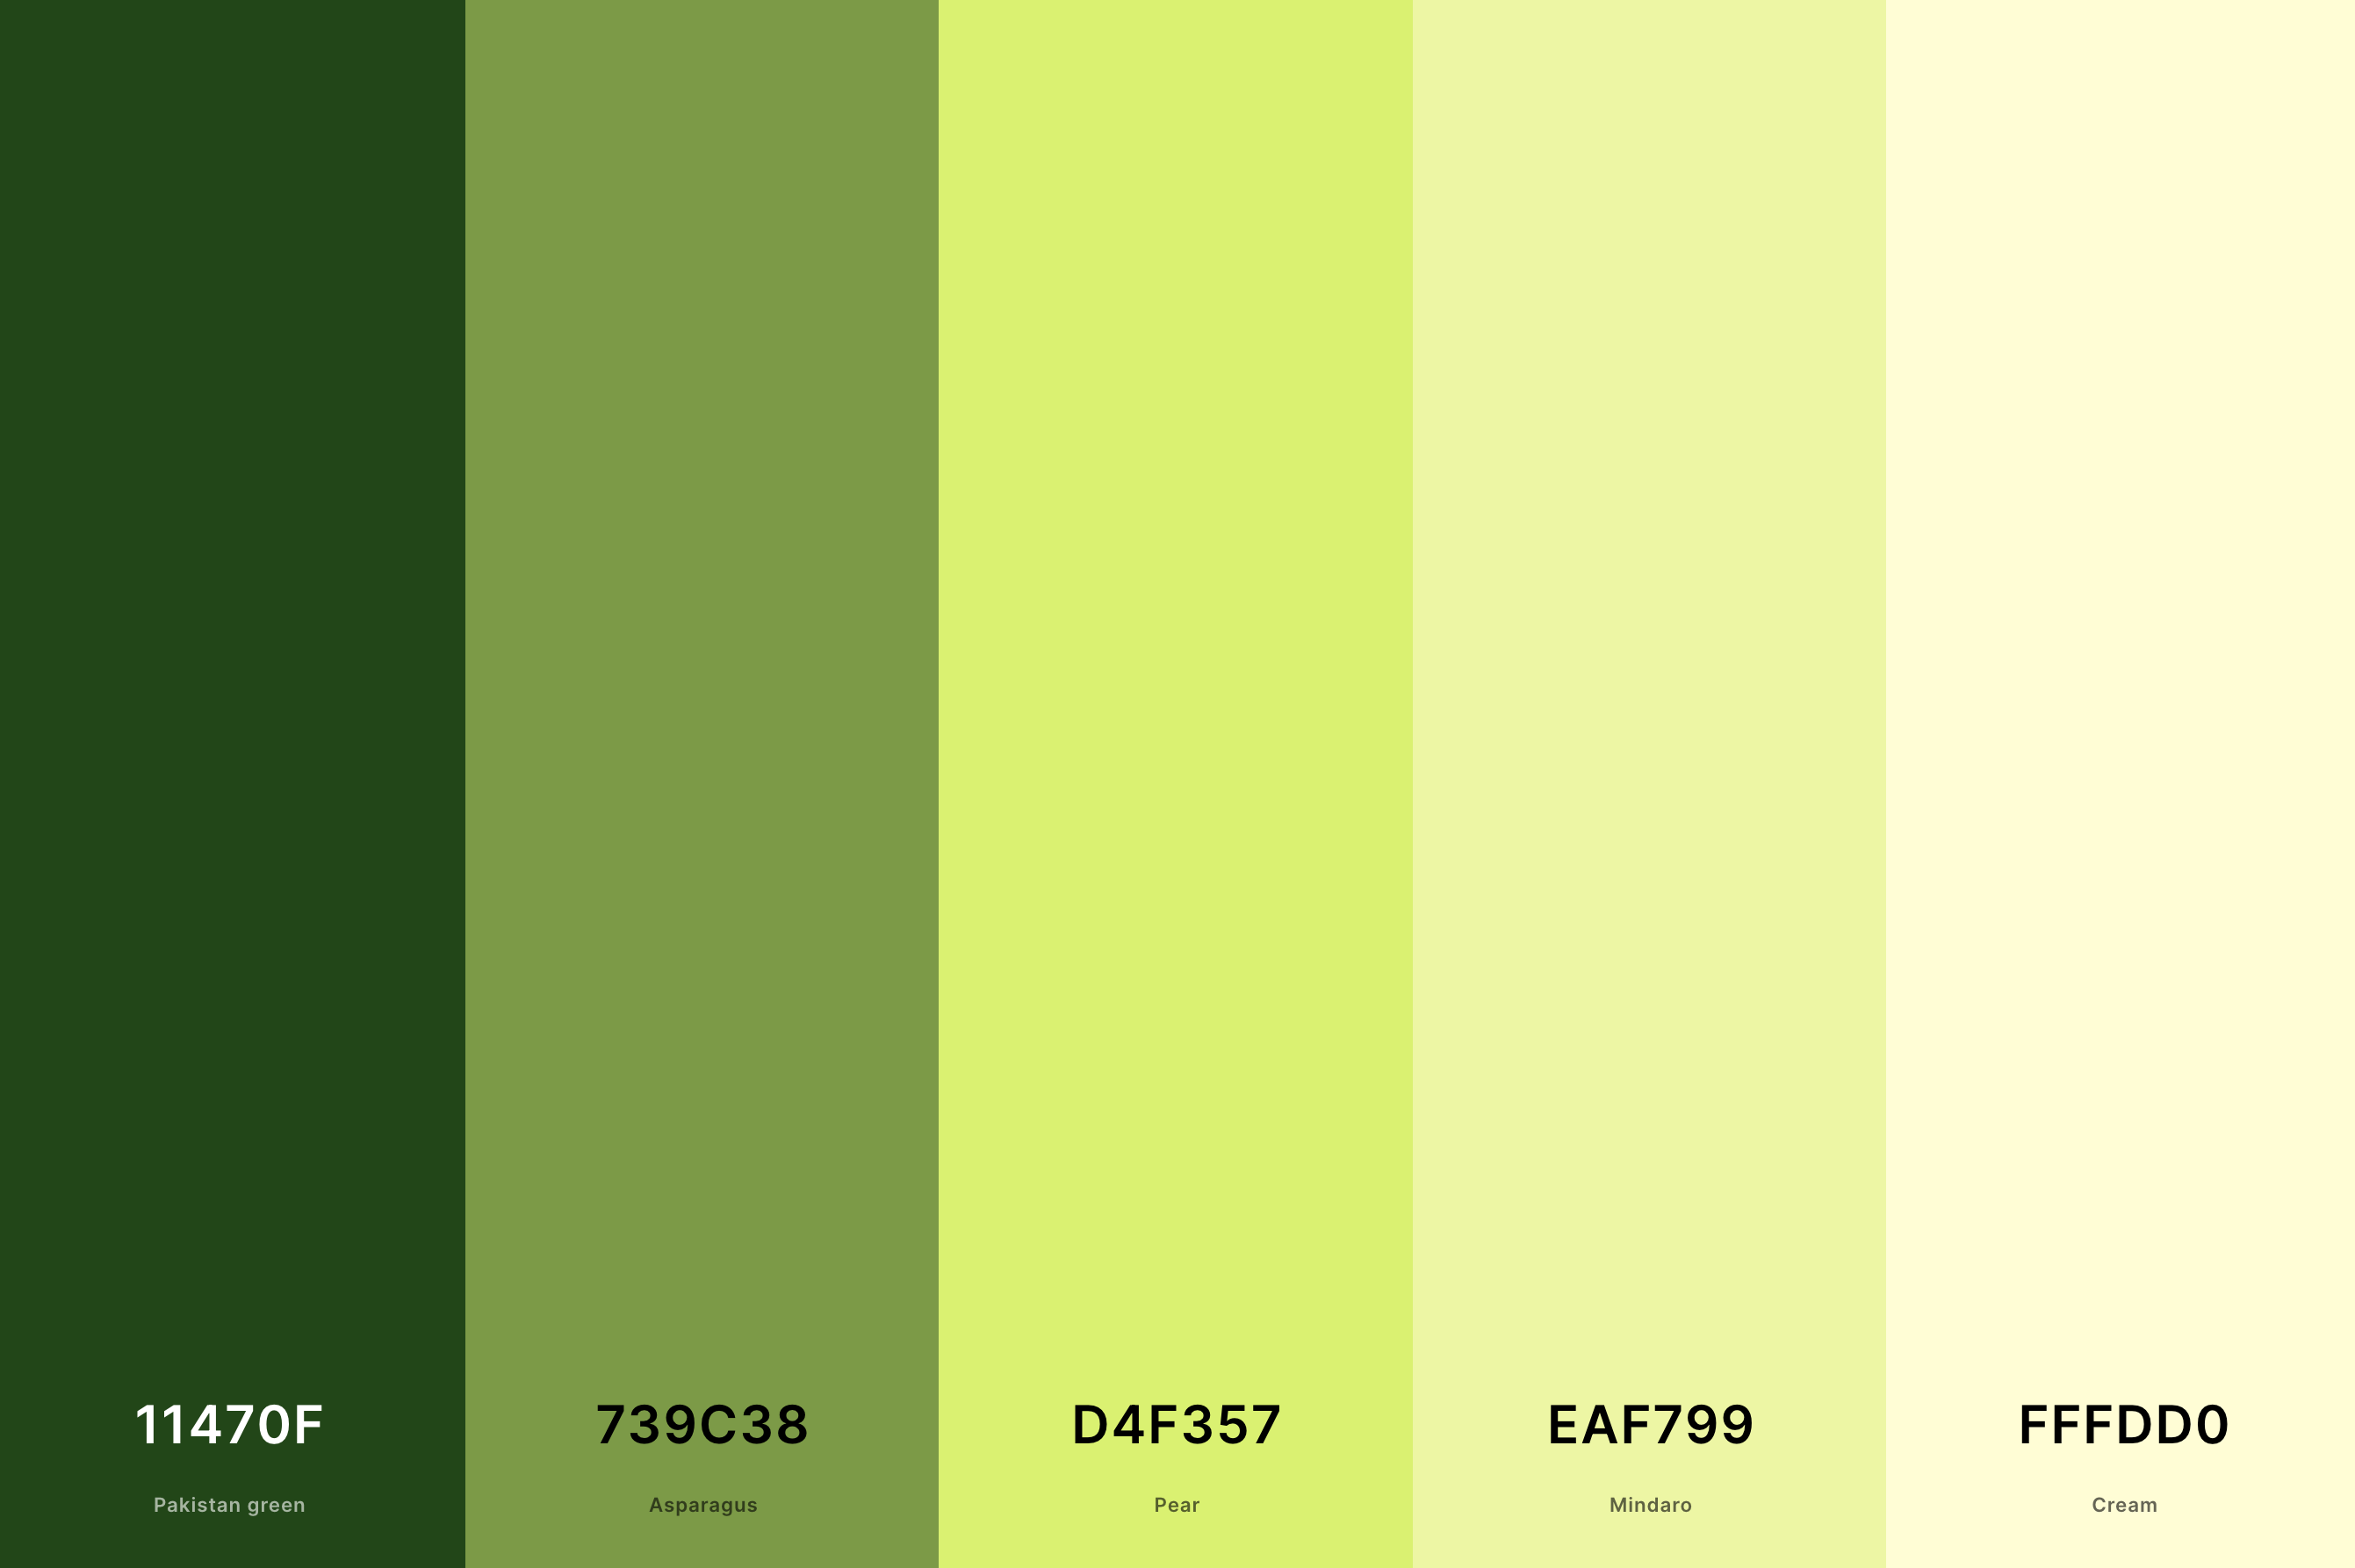 3. Green And Cream Color Palette Color Palette with Pakistan Green (Hex #11470F) + Asparagus (Hex #739C38) + Pear (Hex #D4F357) + Mindaro (Hex #EAF799) + Cream (Hex #FFFDD0) Color Palette with Hex Codes